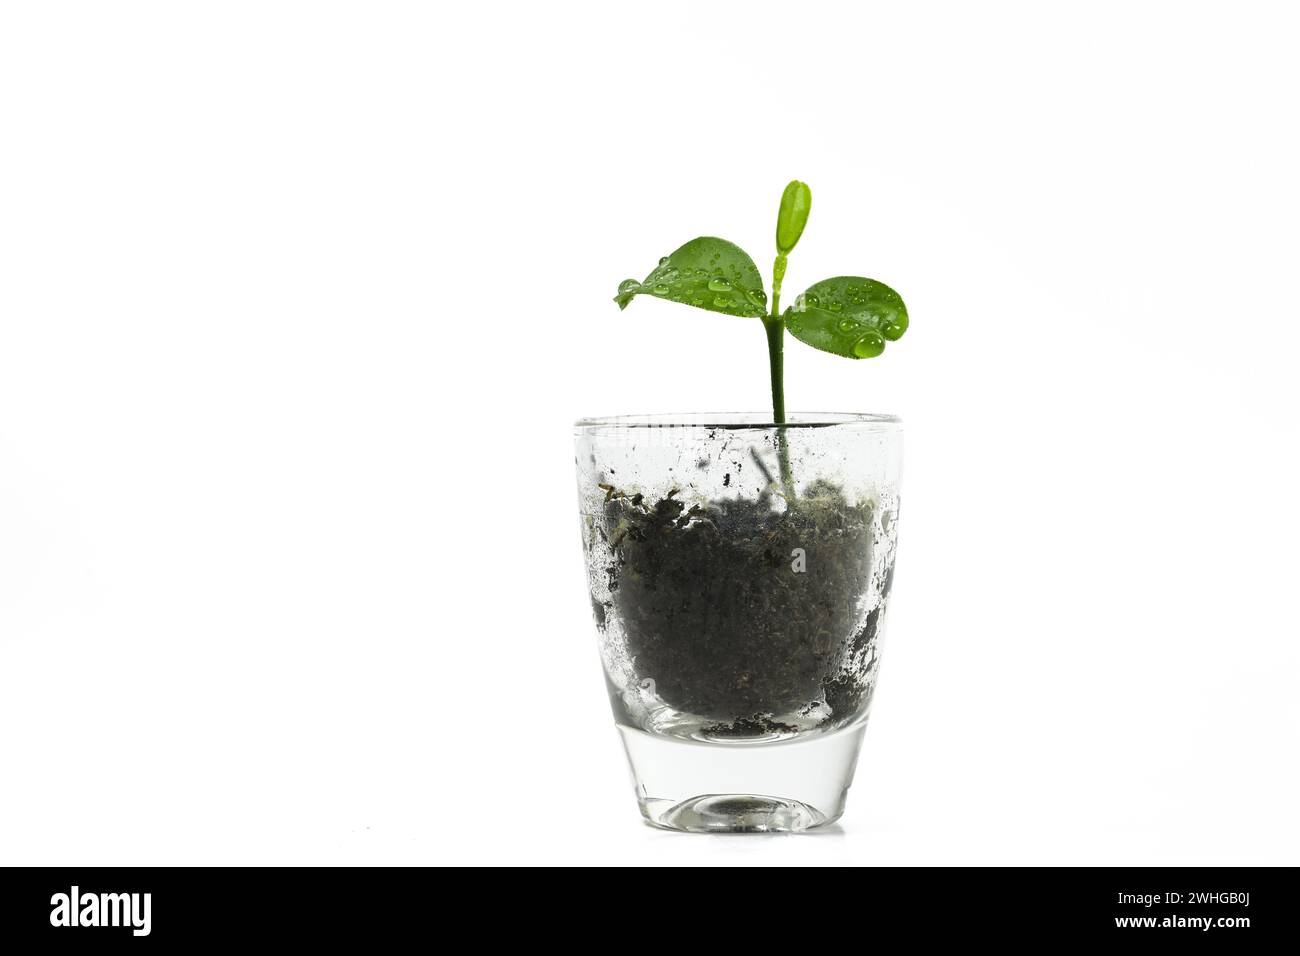 Seedling of a lemon tree growing up in a small glass, nature metaphor for patience, growth and sprouting success, isolated on a Stock Photo